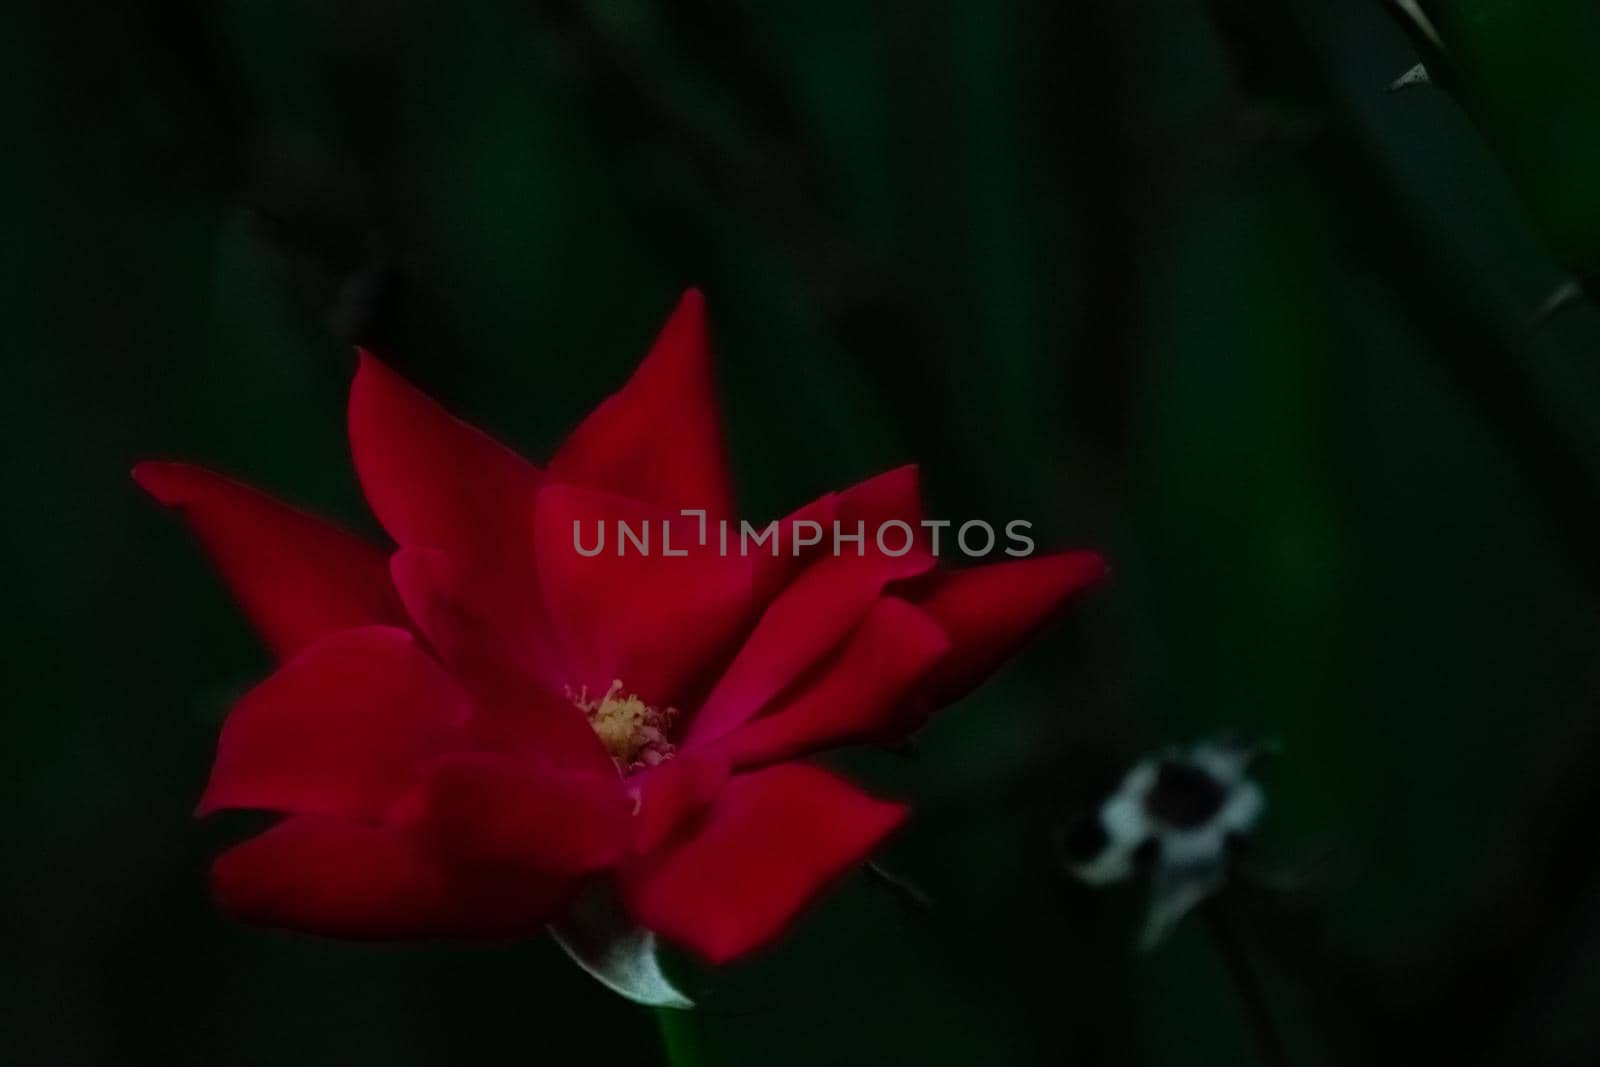 A Close Up Of a Bright Red Rose on a Dark Green Backround With Other Plants Out of Focus Behind It